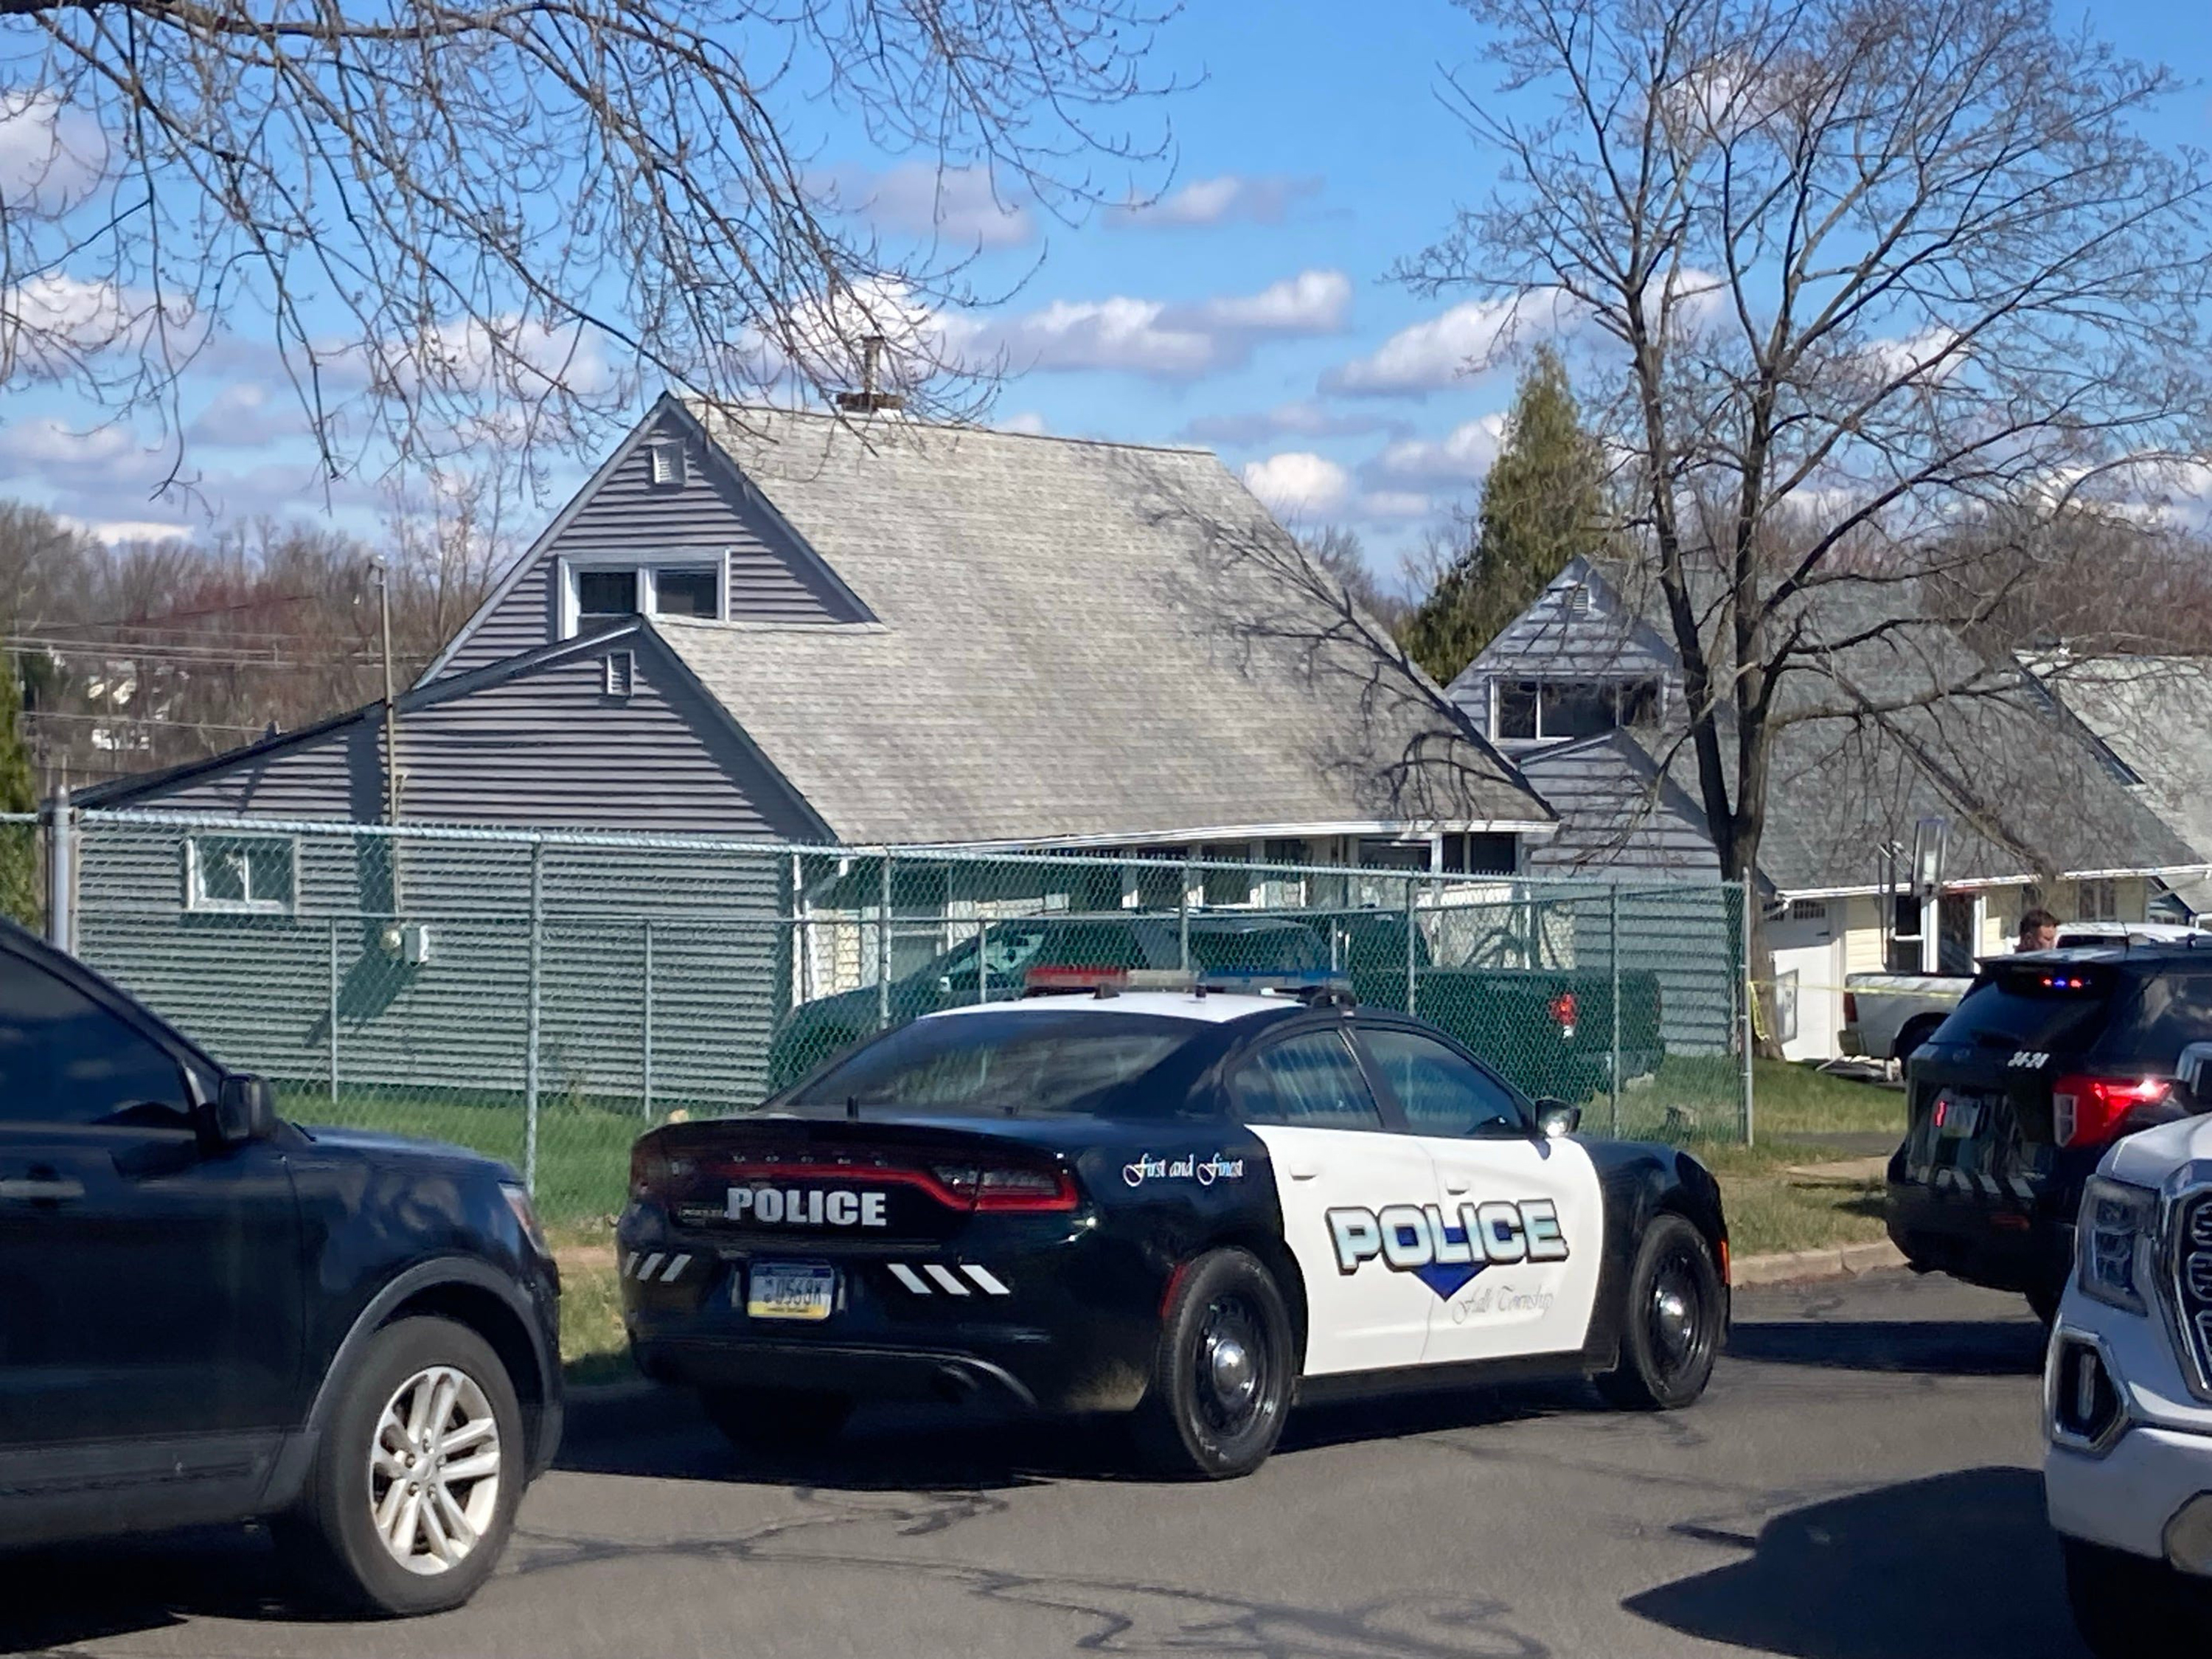 Police investigates after a fatal shooting in Falls Township on March 16.